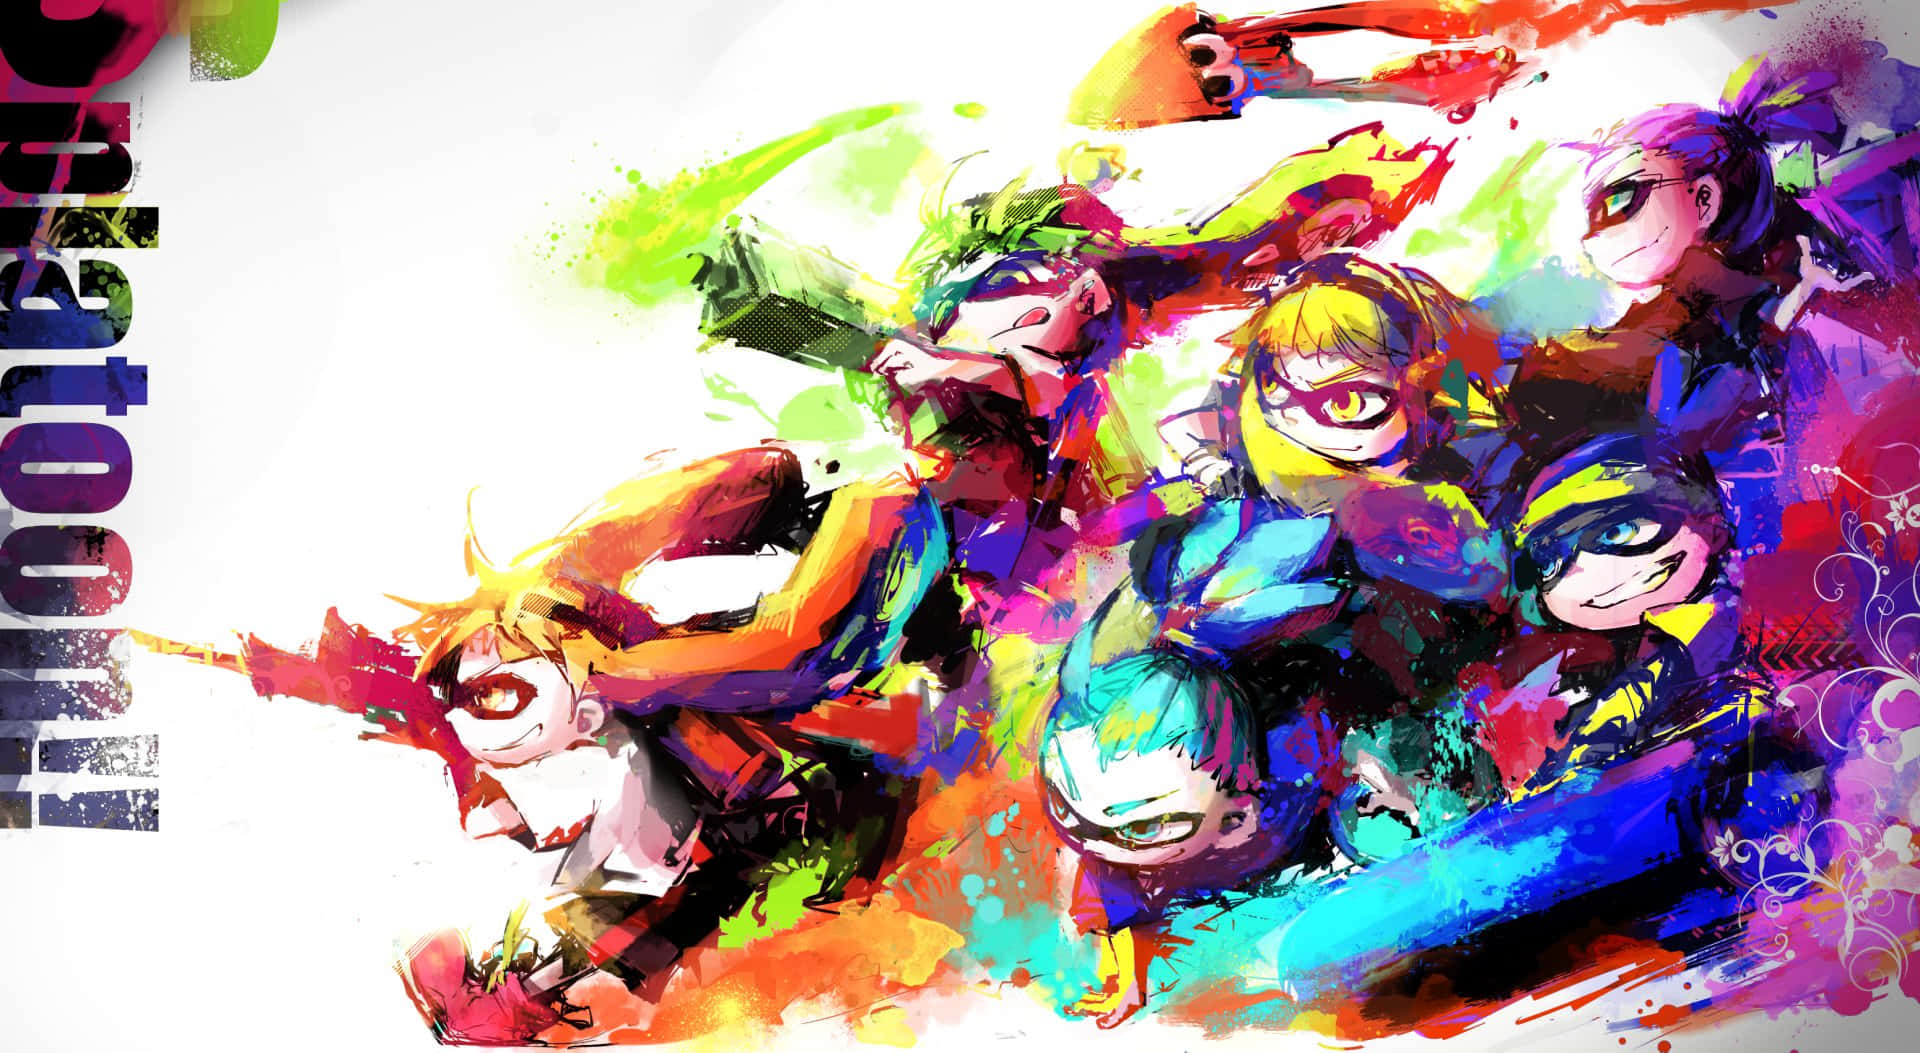 A team of Inklings geared up and ready to splat their opponents!